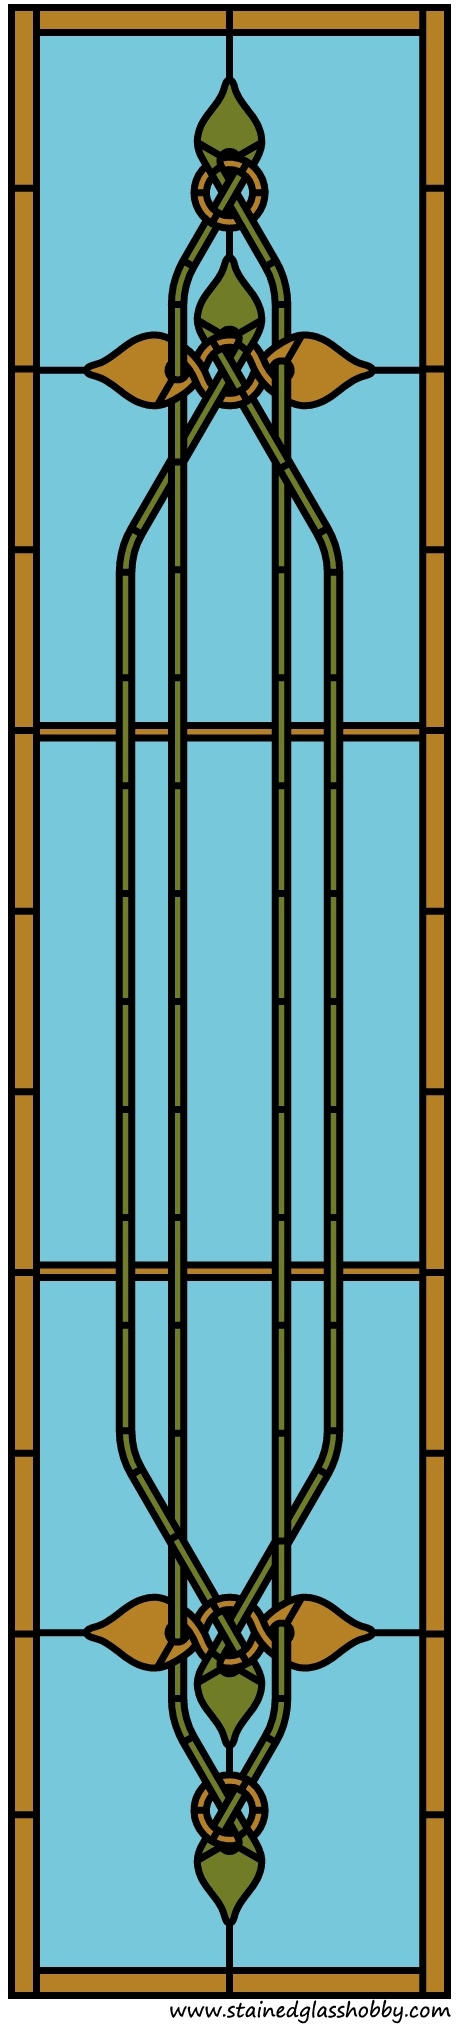 Celt stained glass panel pattern